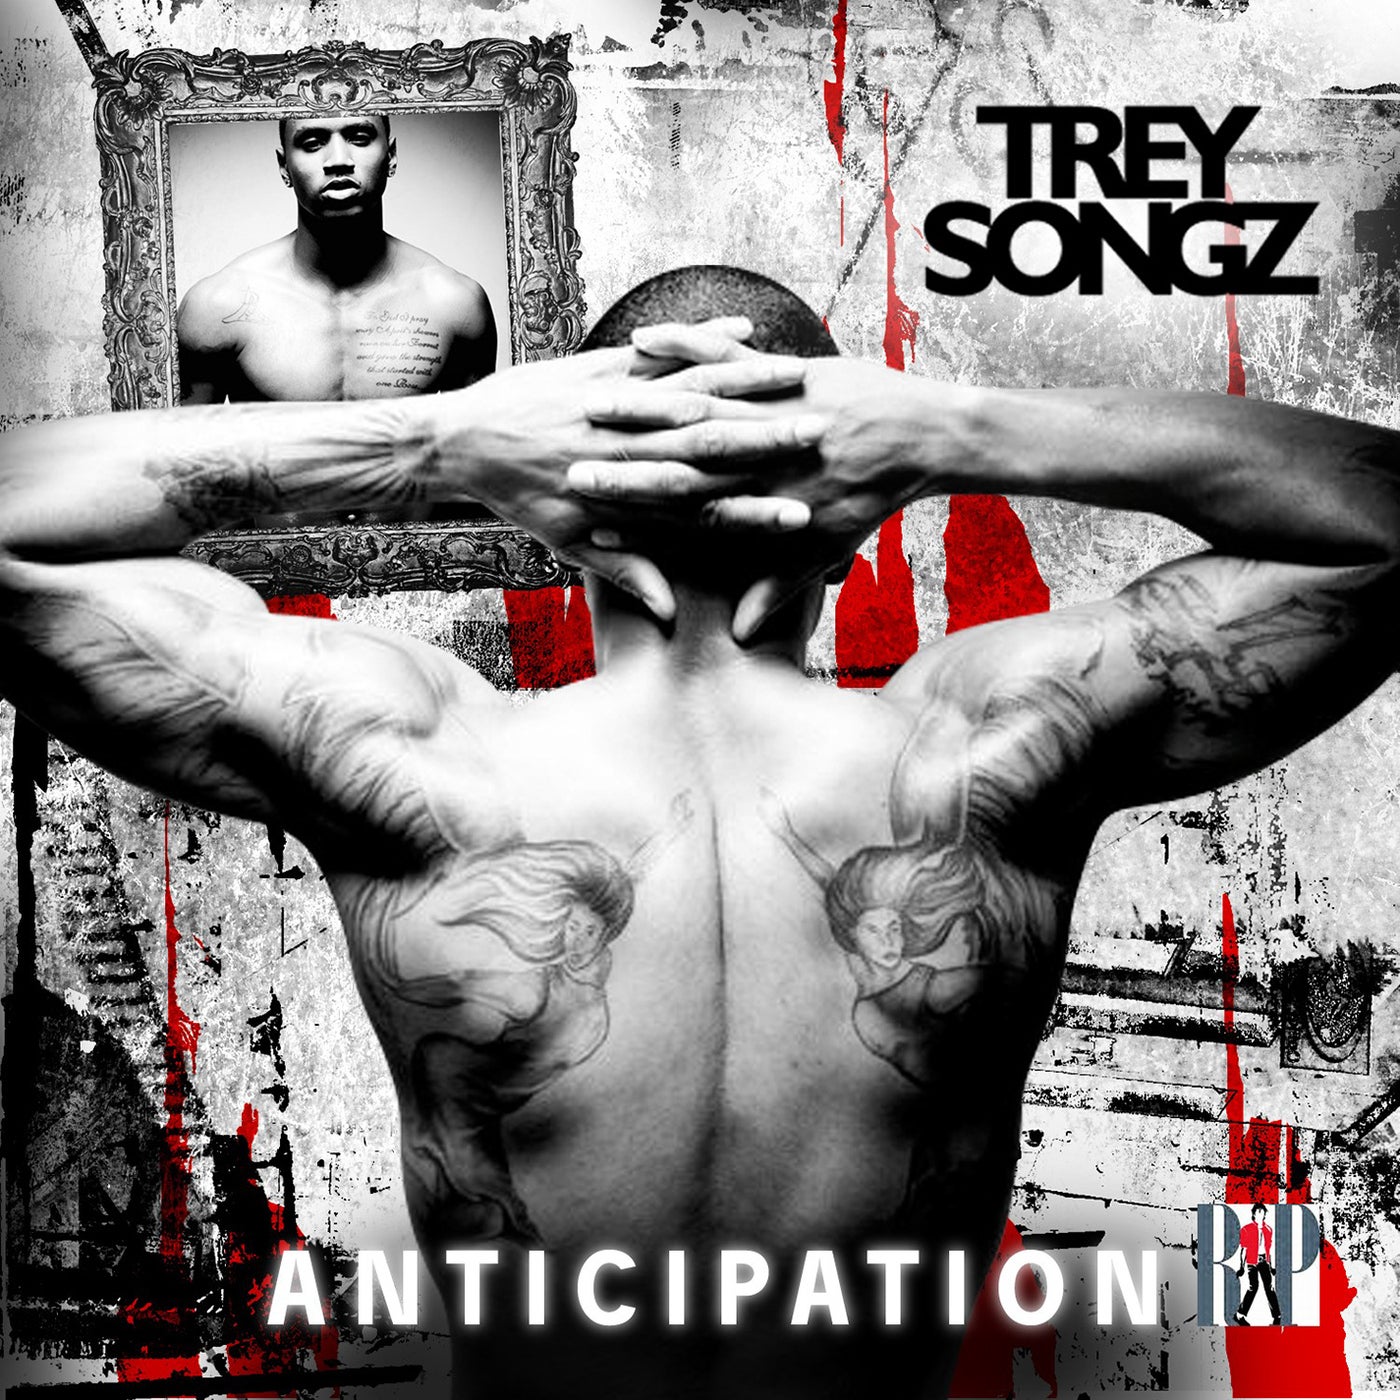 Anticipation I by Trey Songz and Sammie on Beatsource.